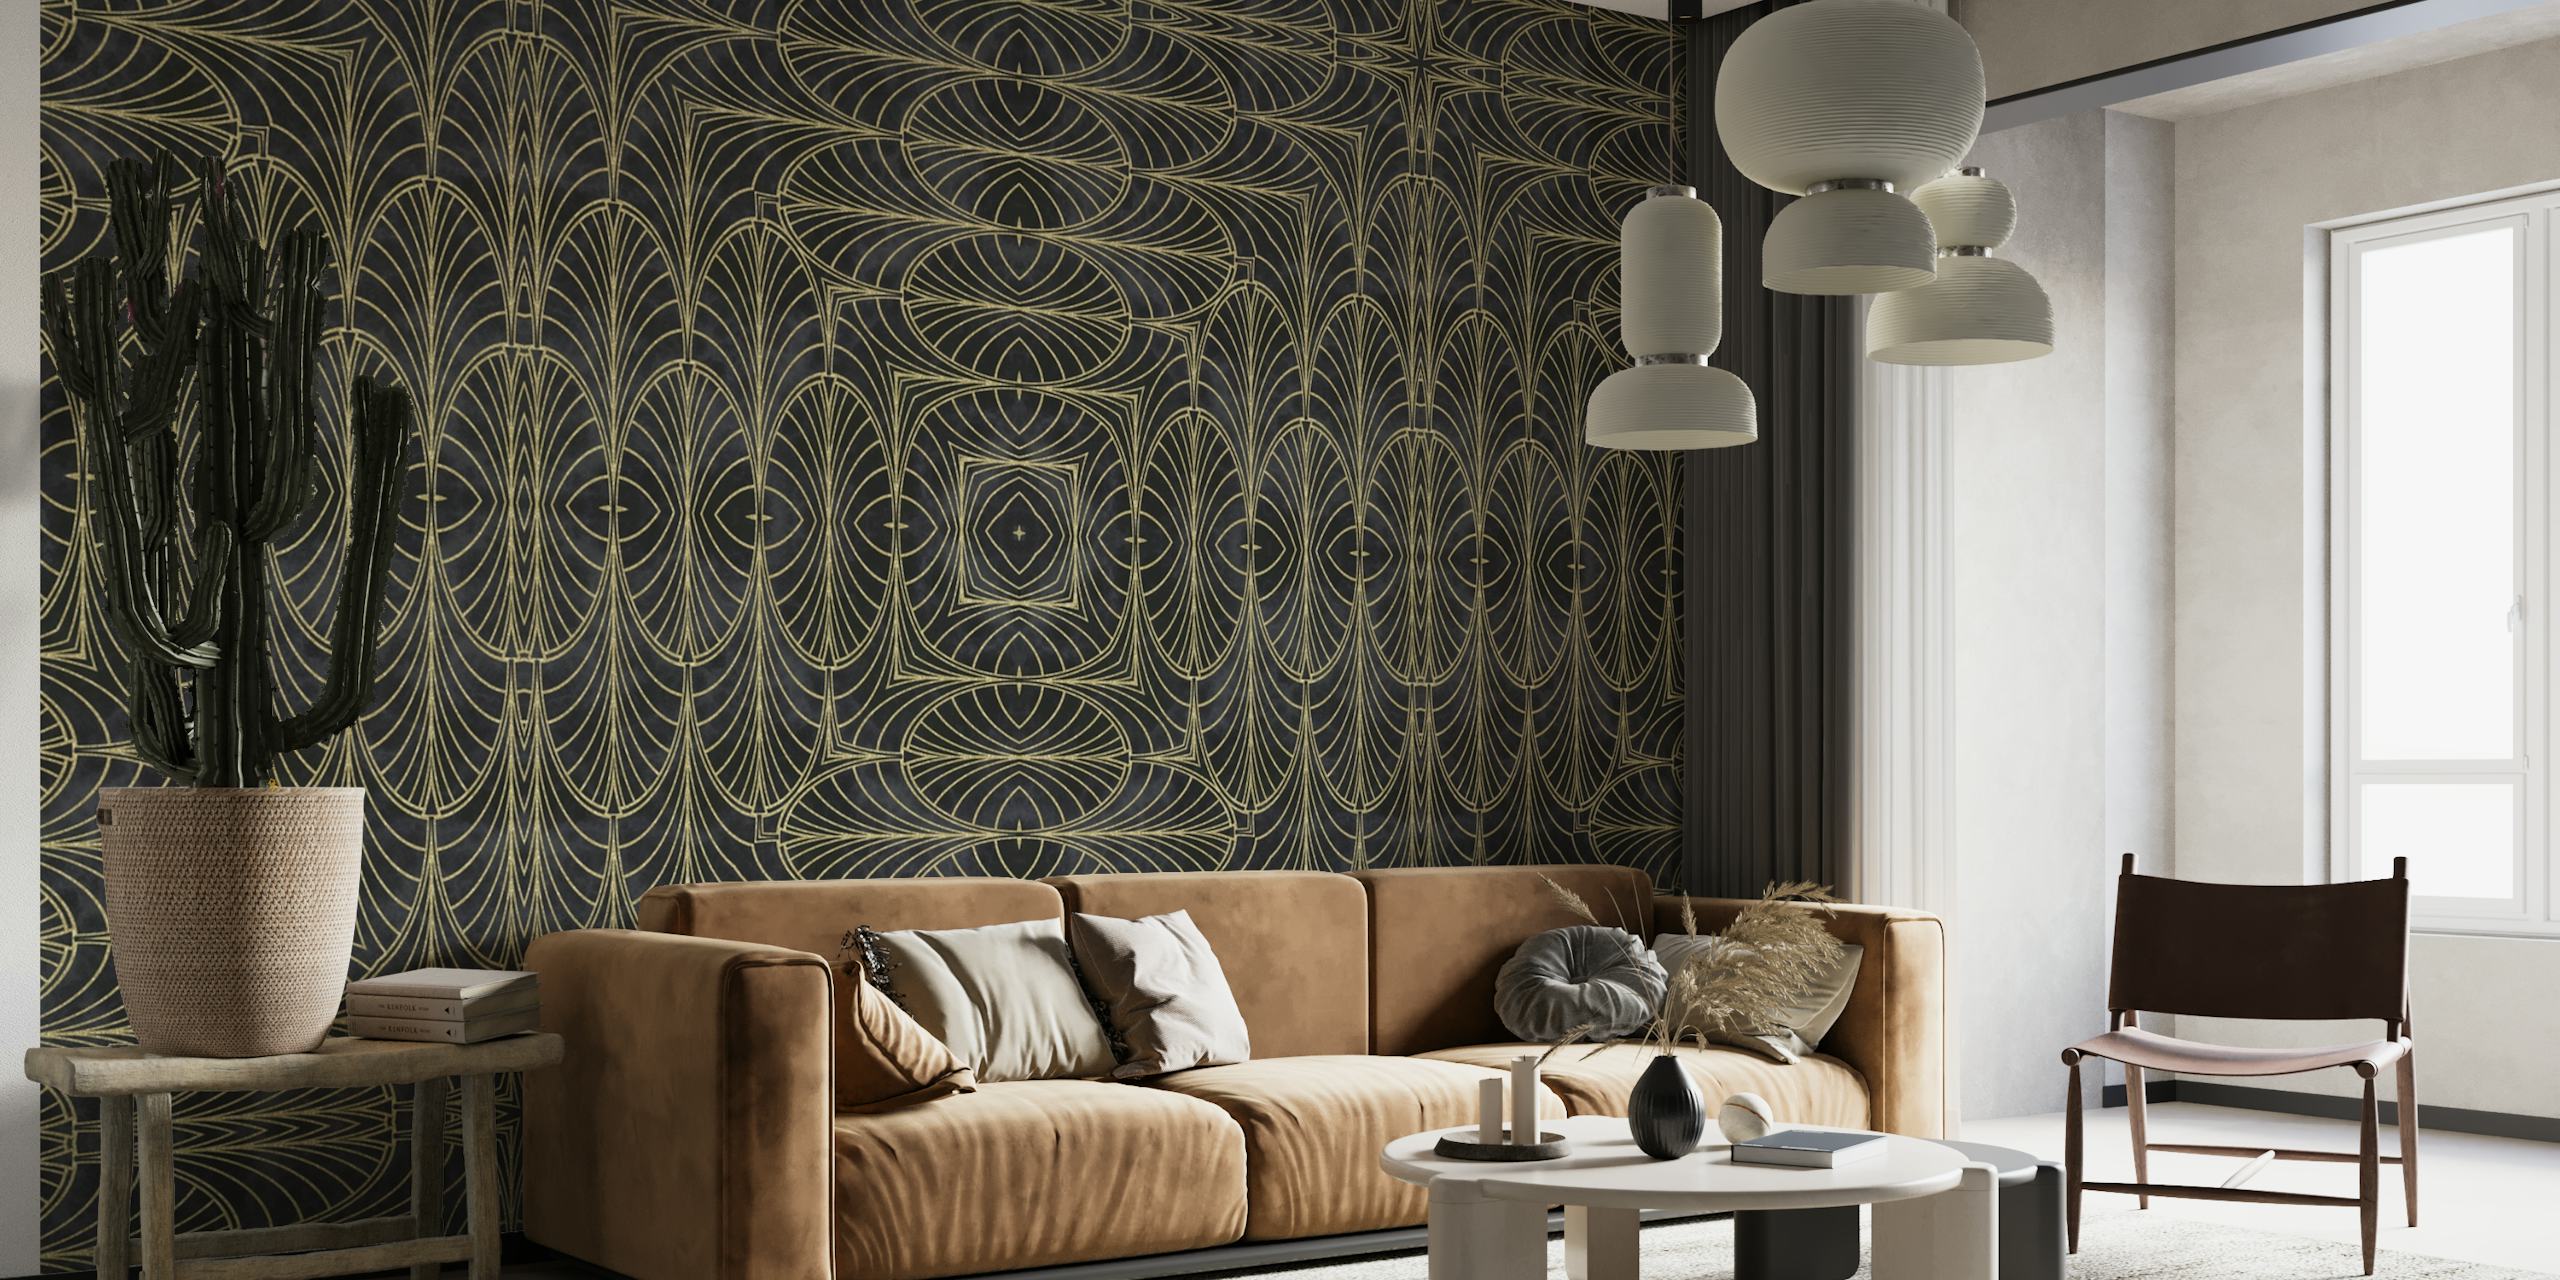 Art Deco Design Gold Black 2 wall mural with geometric gold patterns on black background